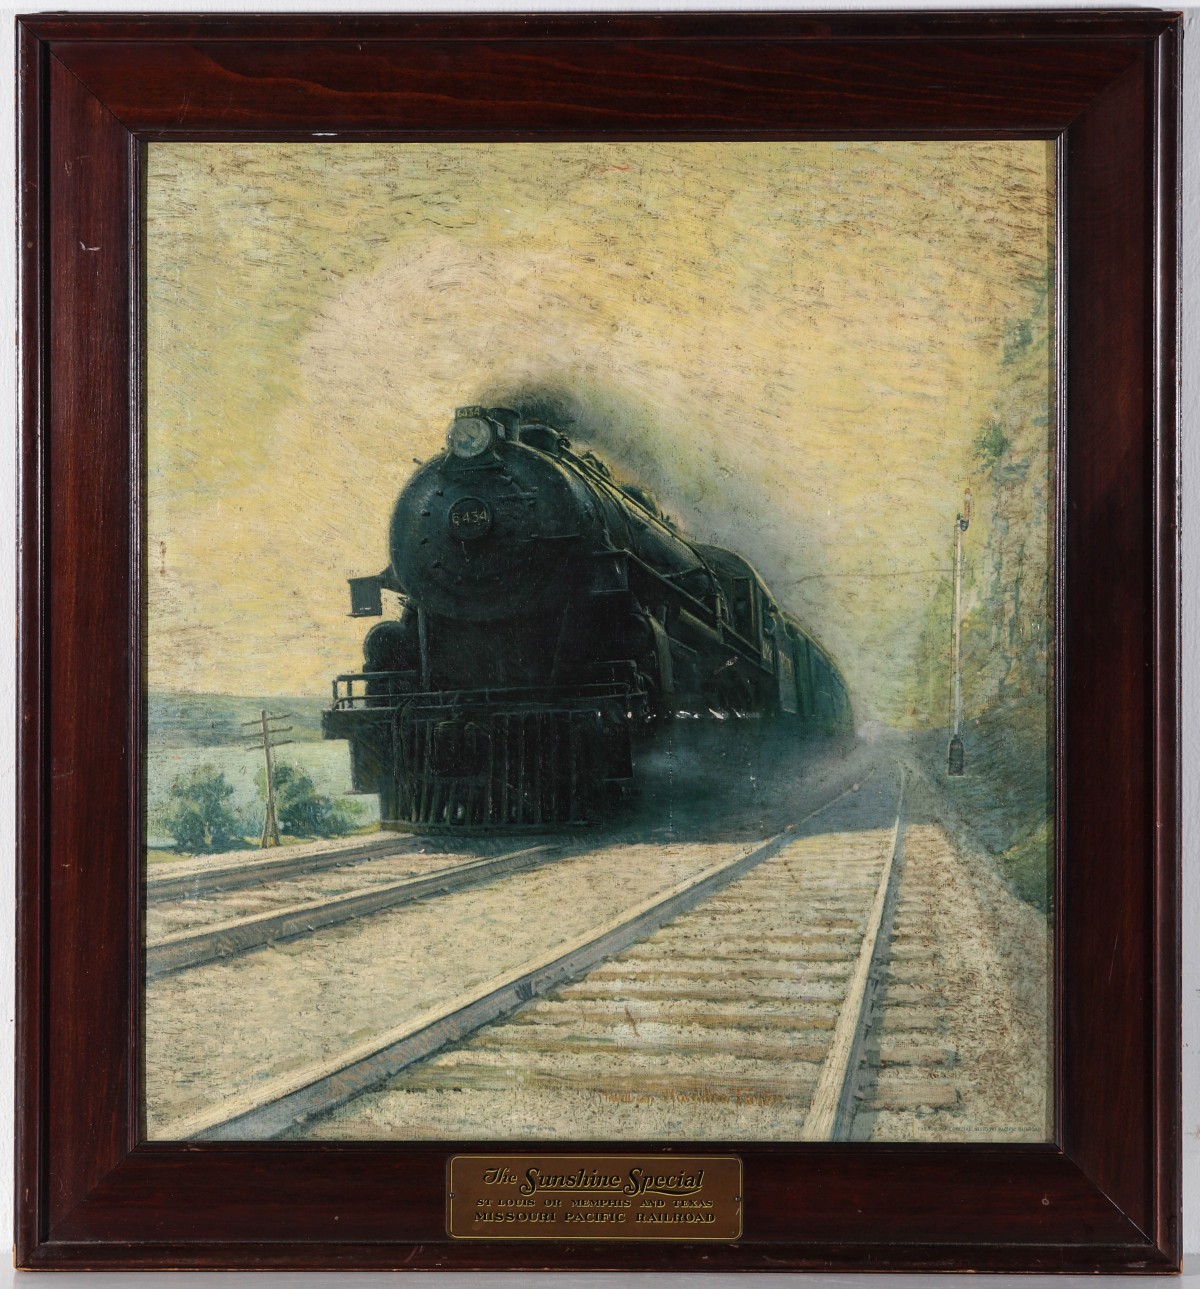 A MOPAC RR 'THE SUNSHINE SPECIAL' ADVERTISING PRINT